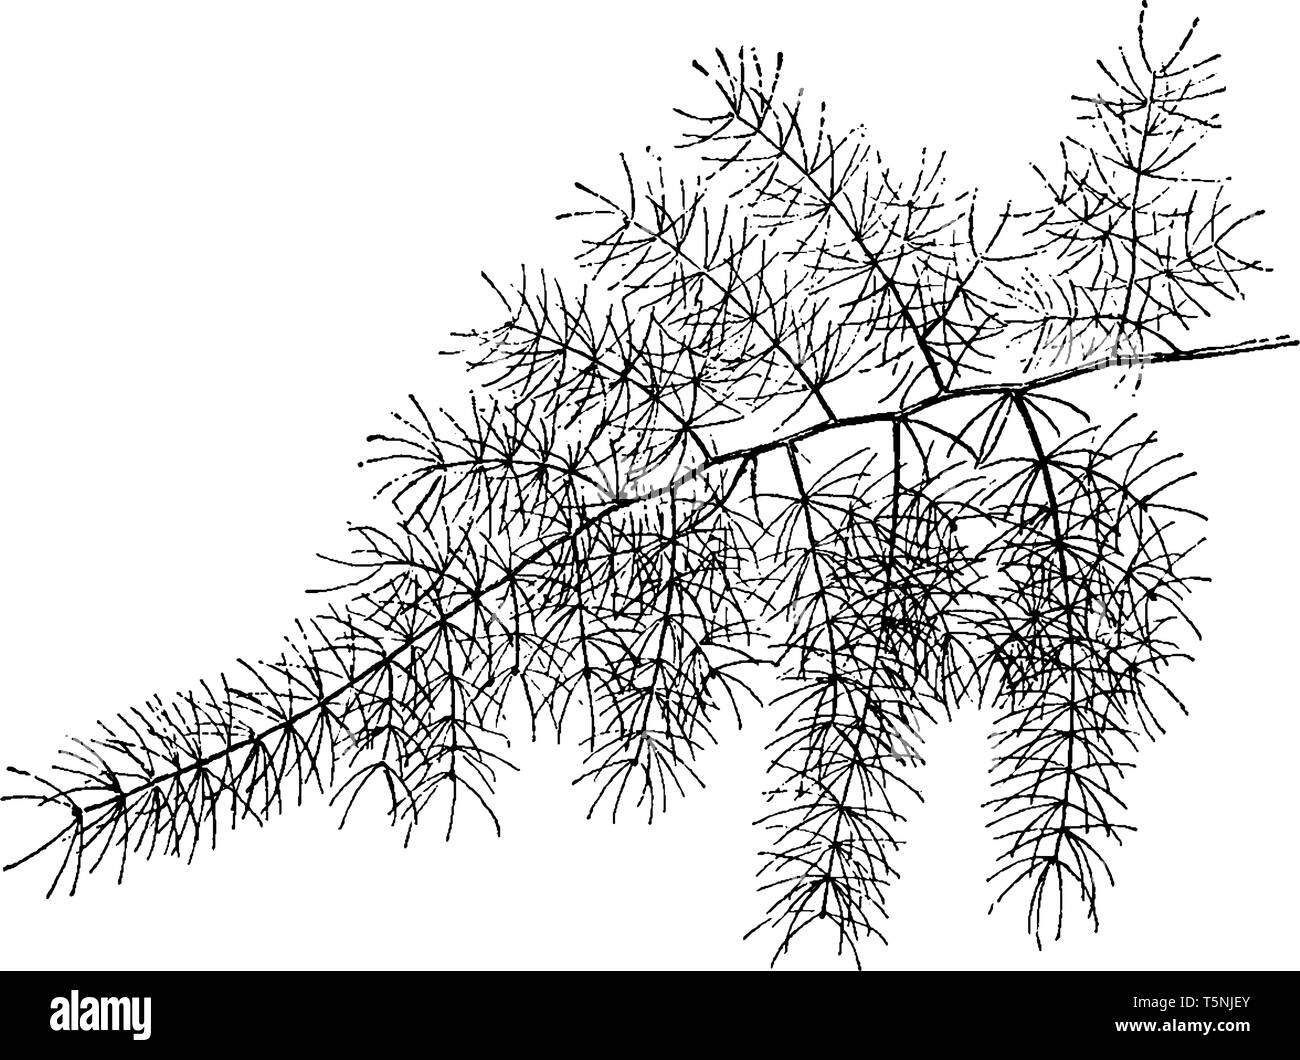 Asparagus is a perennial vegetable. The plants may take 2 to 3 years to truly get started and produce, vintage line drawing or engraving illustration. Stock Vector